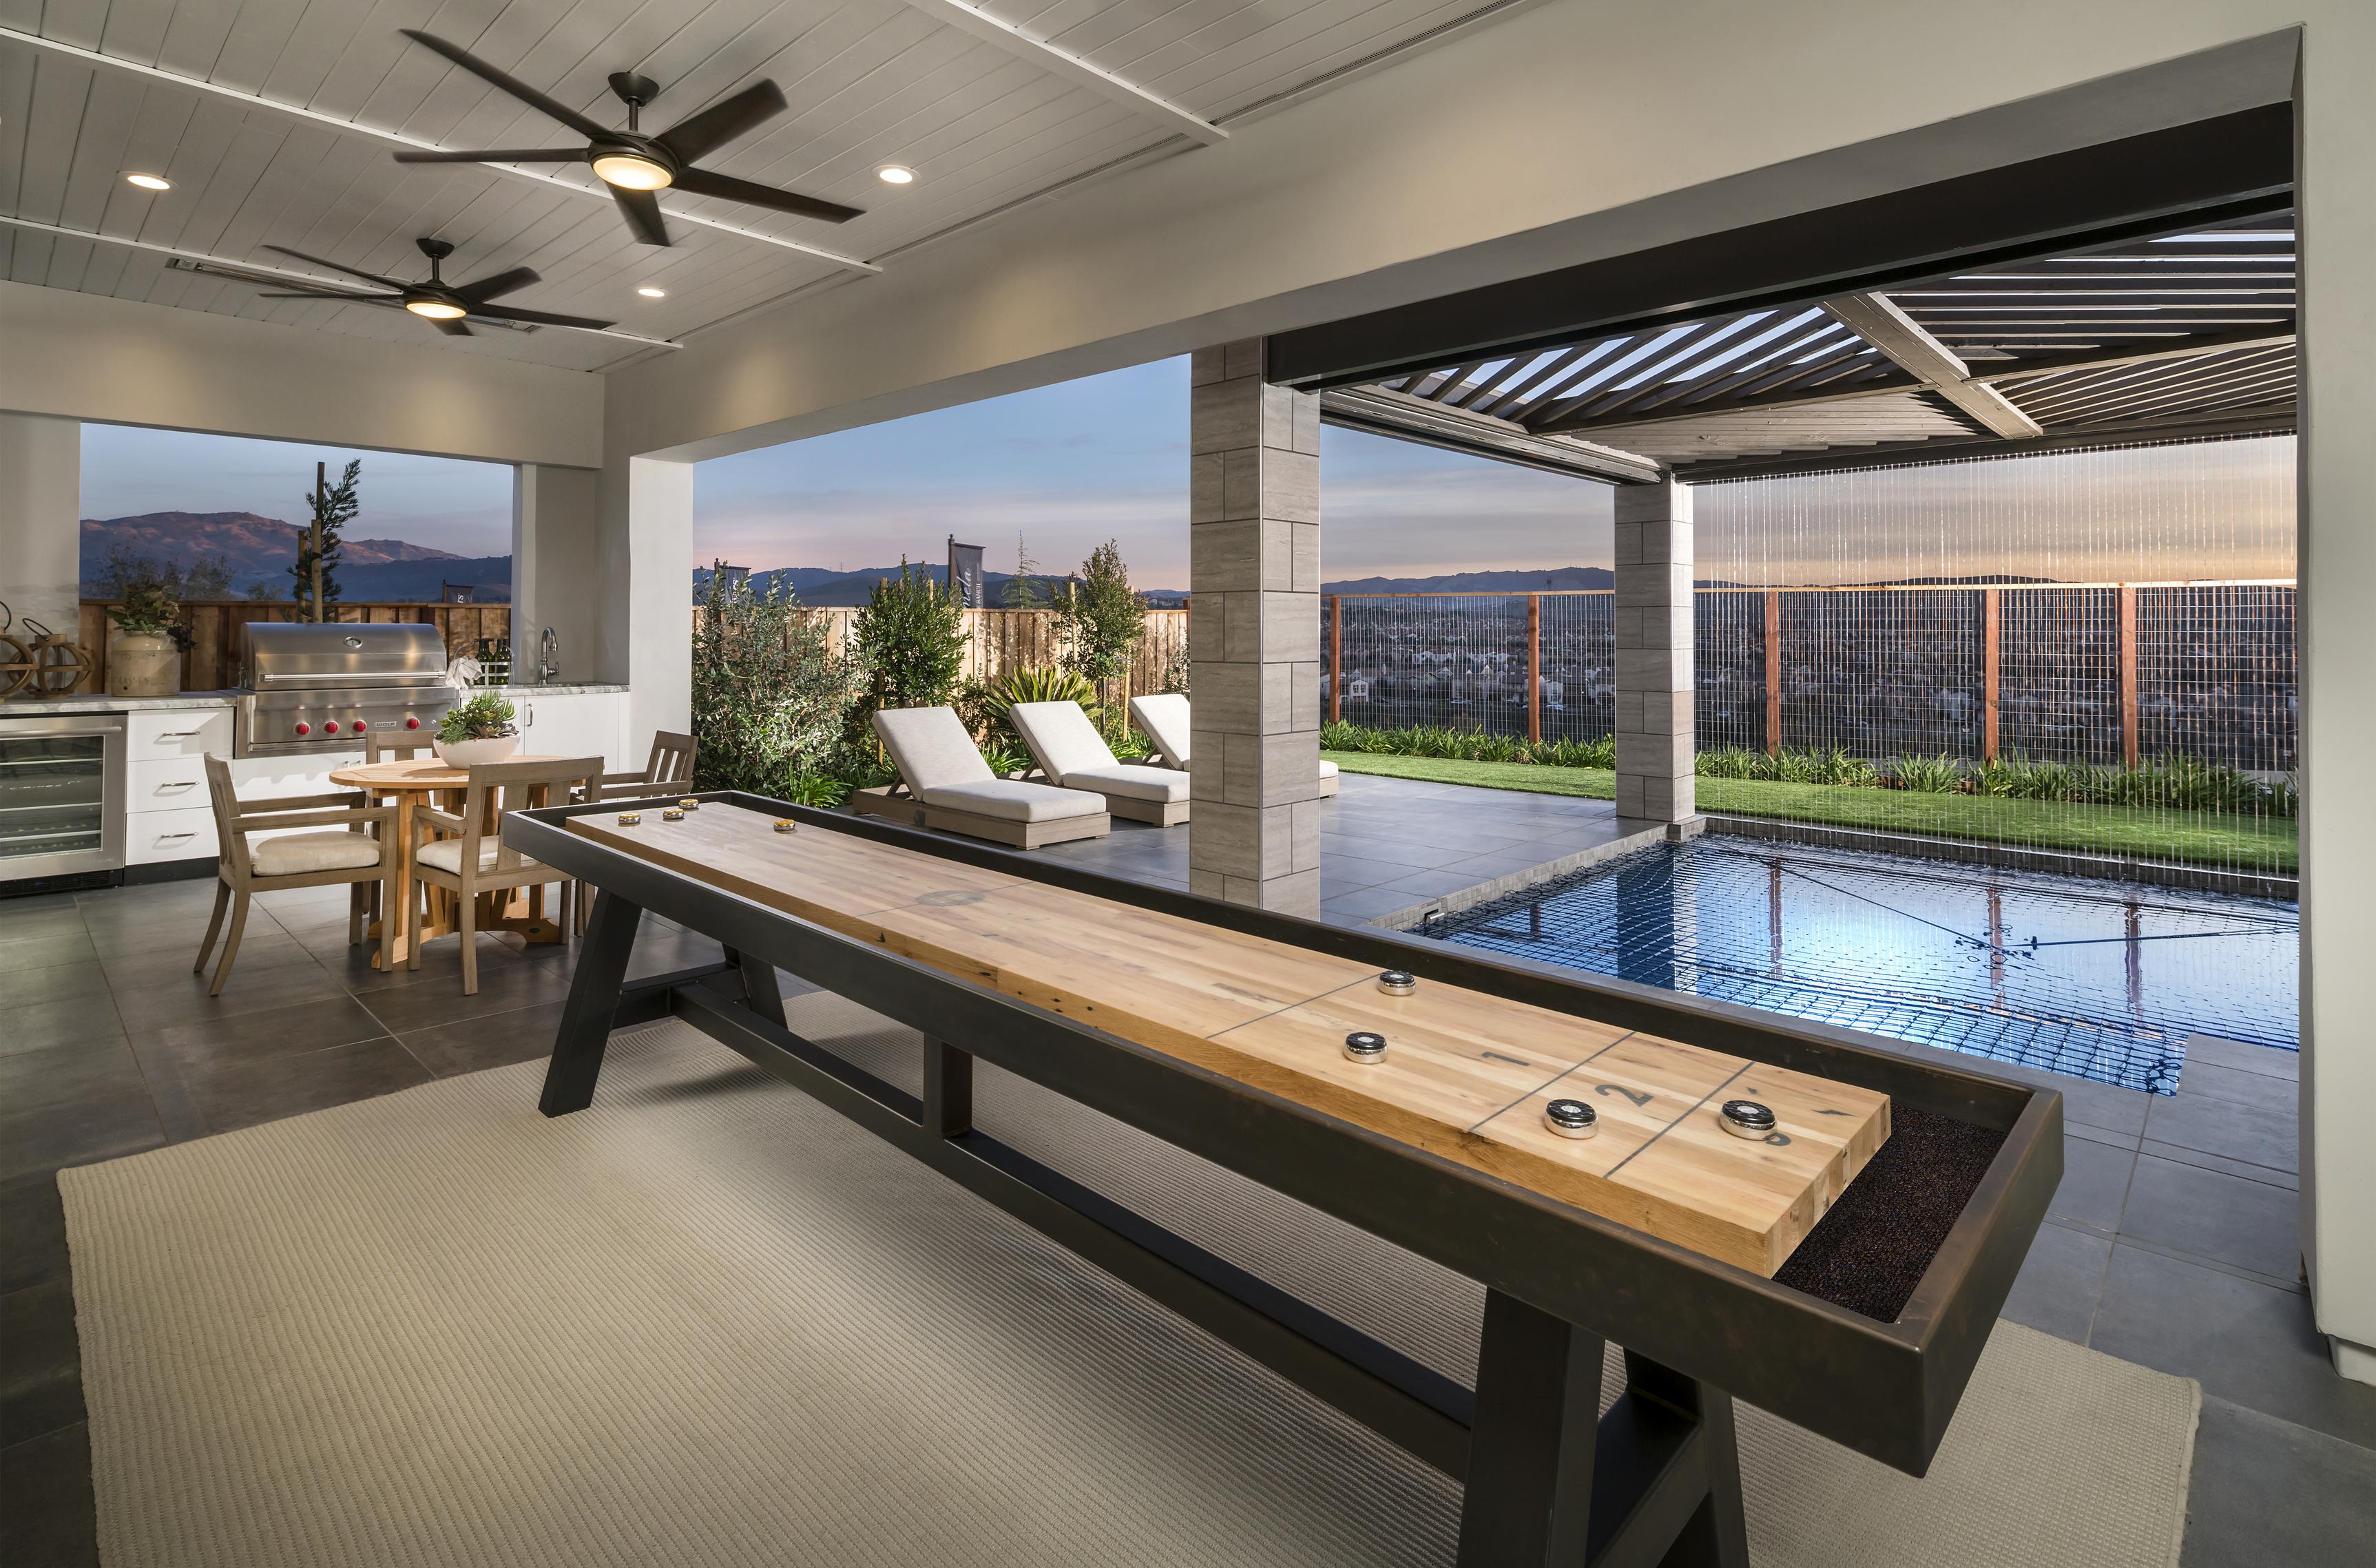 Entertaining outdoor living space highlighted by pool, grilling area, and shuffleboard.